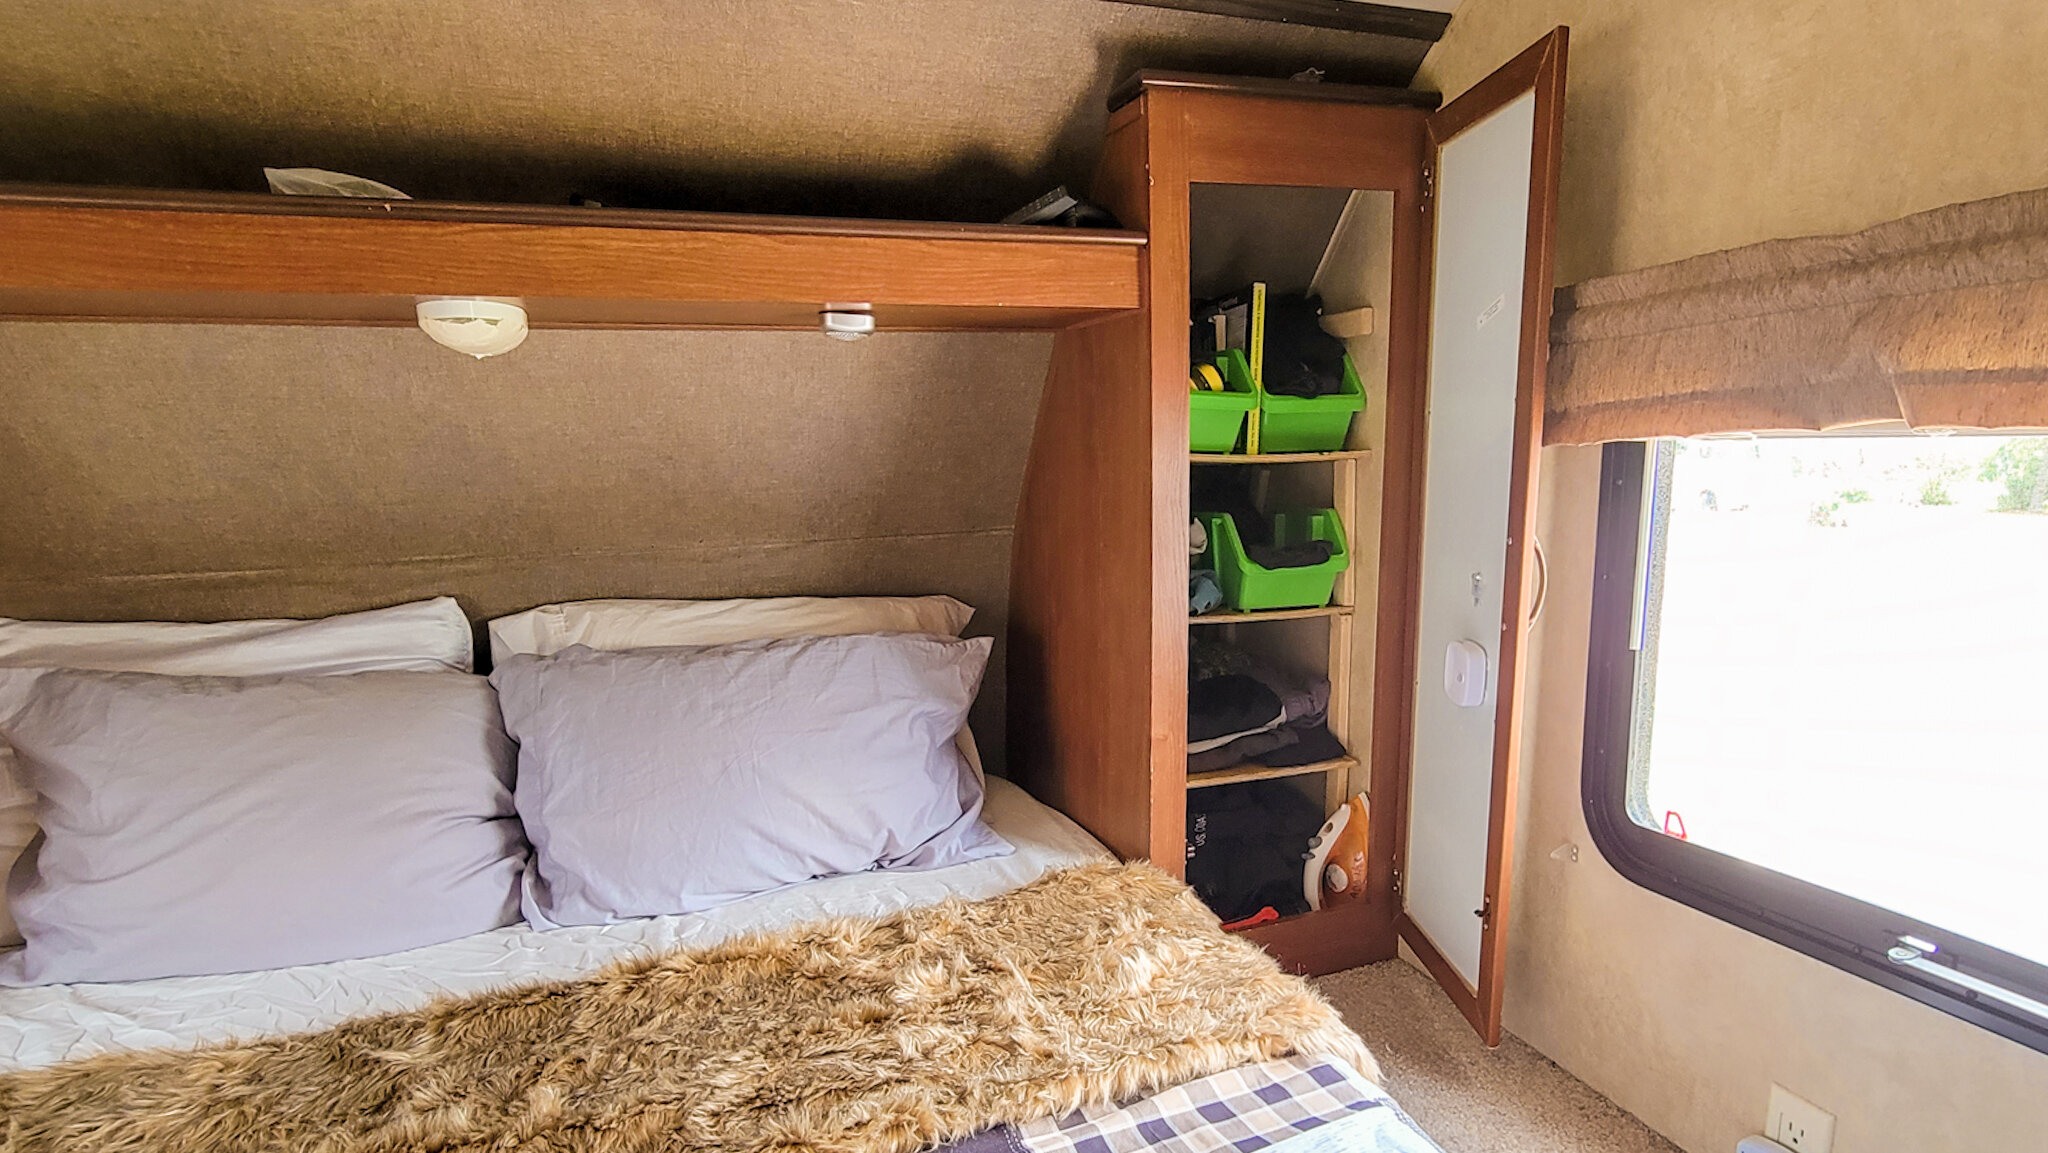 Calm The Clutter: RV Storage Solutions And Organization